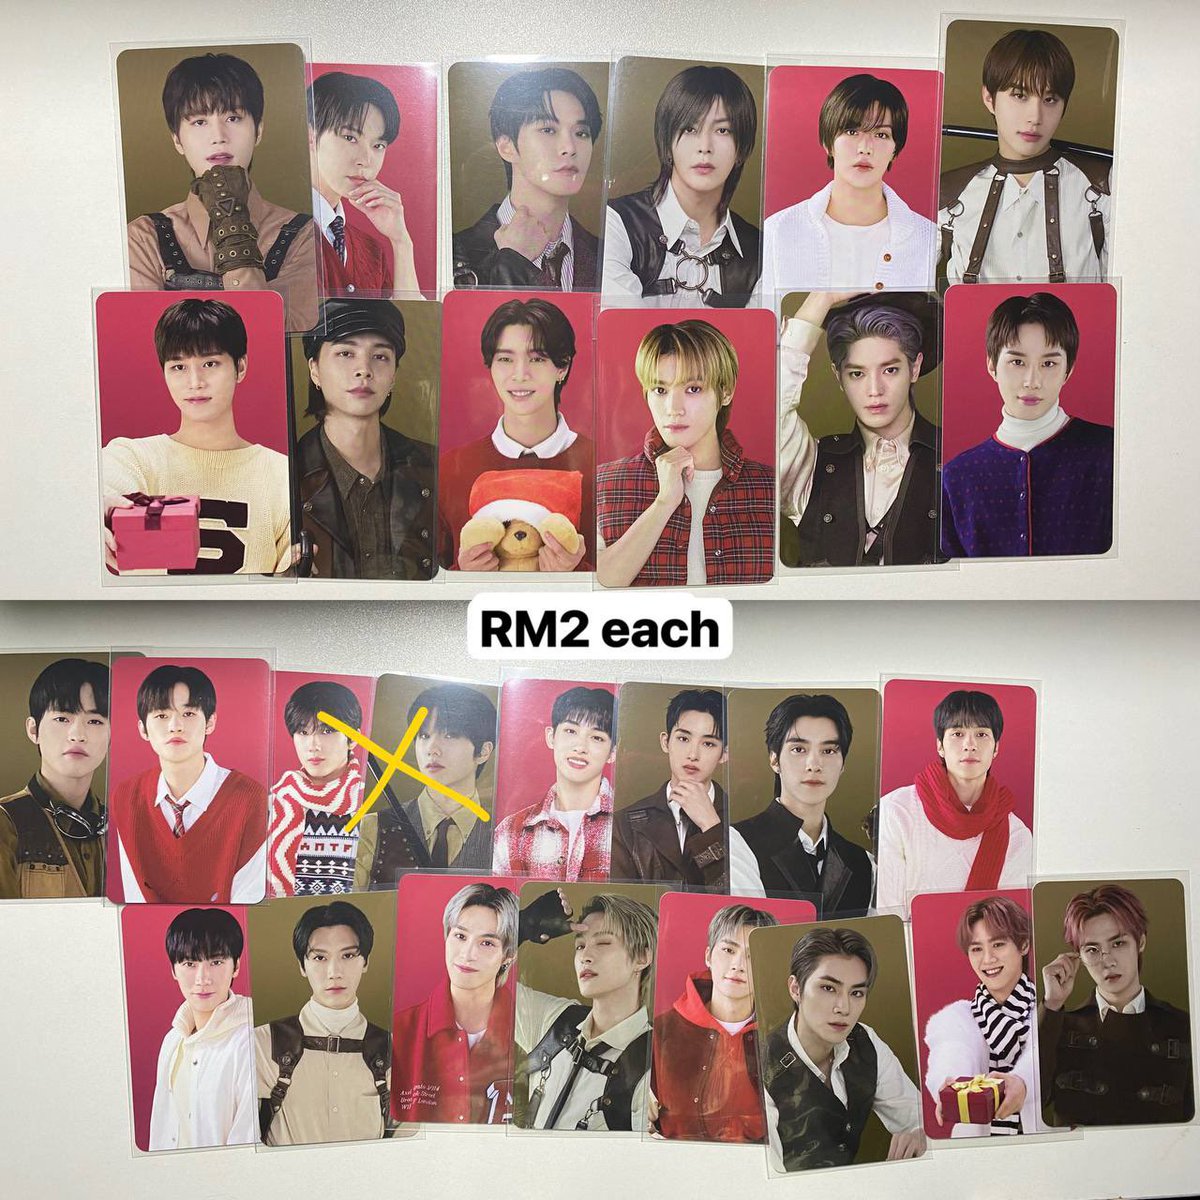 WTS NCT ZONE COUPON PHOTOCARD

RM 2 each

Excl local postage (on hand) ☺️

#pasarnct #pasarnctmy